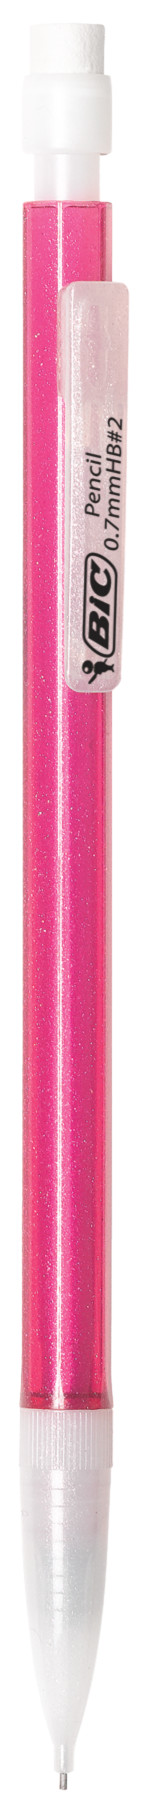 BIC Xtra-Sparkle No. 2 Mechanical Pencils with Erasers, Medium Point (0.7mm), 24 Pencils - image 6 of 7